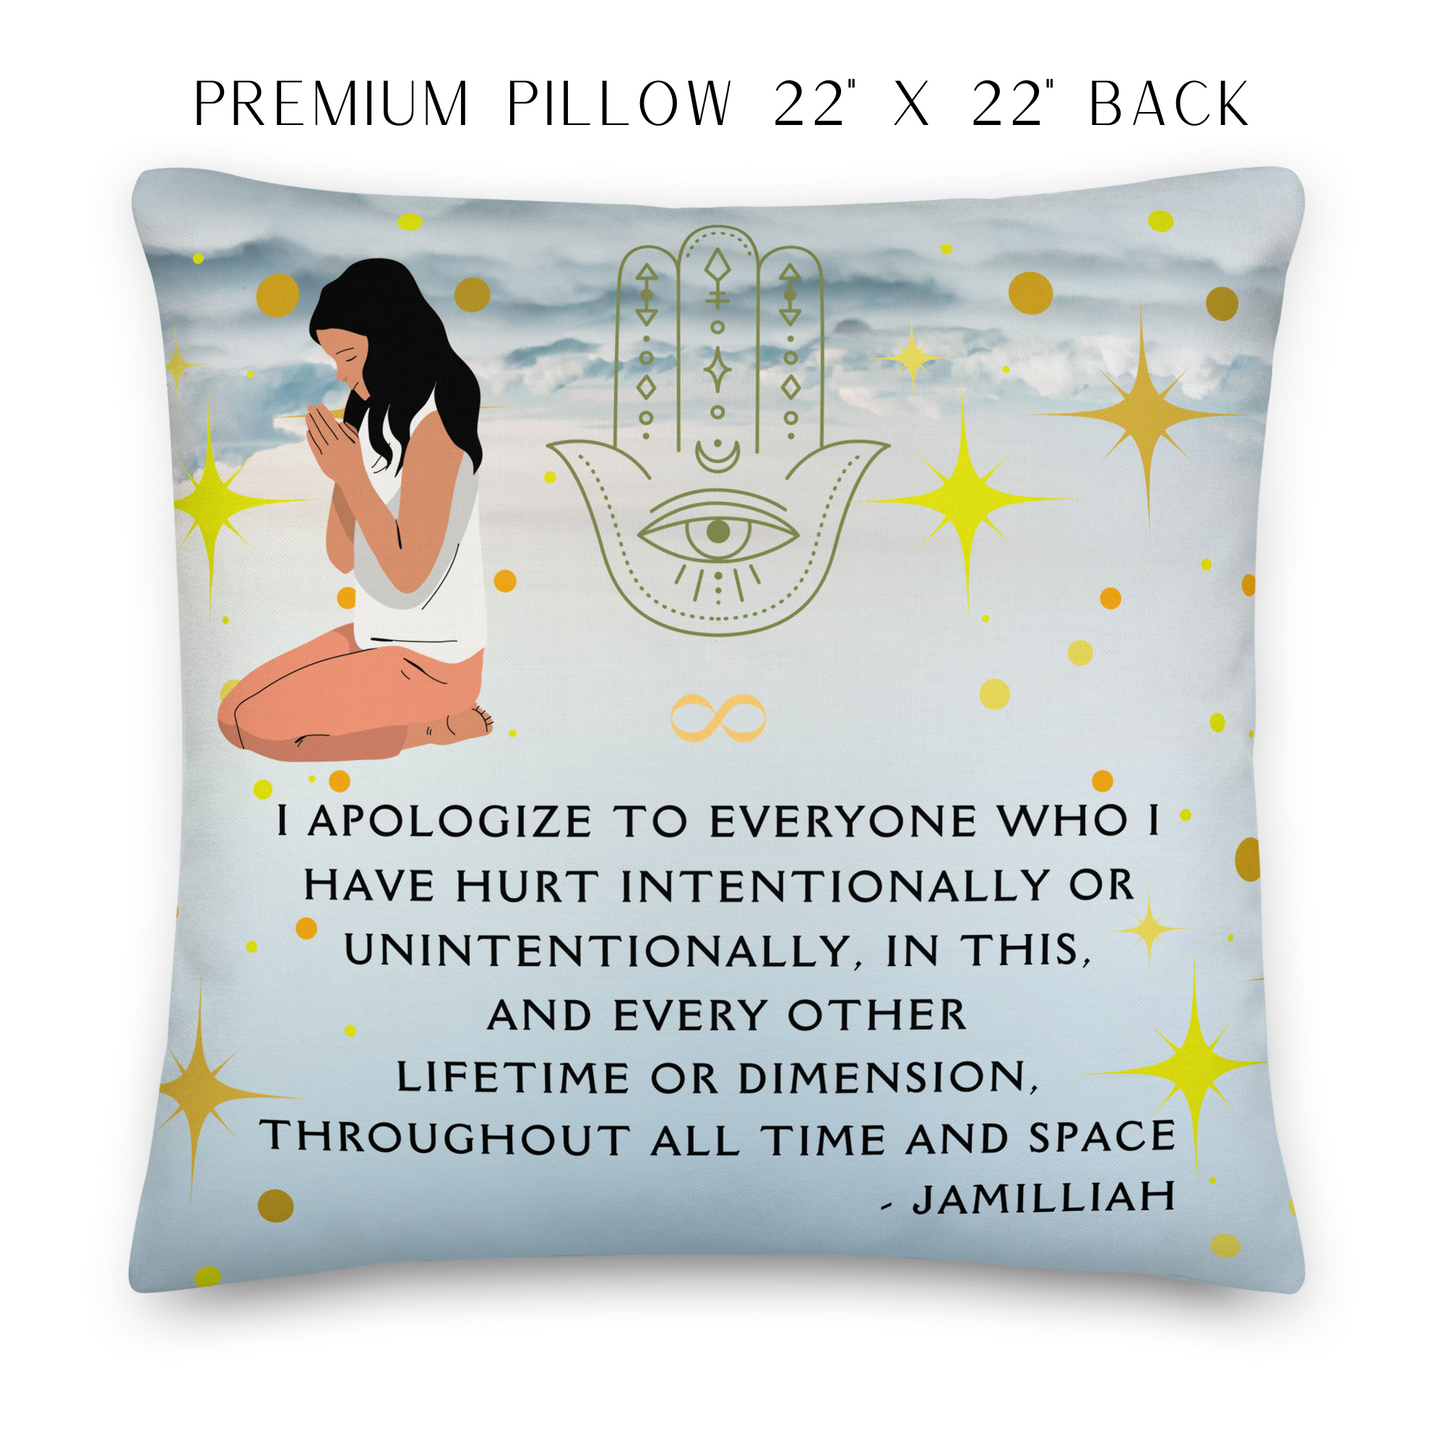 22x22 inch premium pillow, back. Sky, clouds, stars, and circles design with female on her knees praying. Spiritual, hamsa hand/infinity symbol/sign brand logo image. Original wise quote mantra/saying/tagline/motto/slogan. "I Apologize To Everyone Who I Have Hurt Intentionally Or Unintentionally, In This, And Every Other Lifetime Or Dimension, Throughout All Time And Space." - Jamilliah JAMILLIAH'S WISDOM IS TIMELESS SHOP - wisdomistimeless.com.